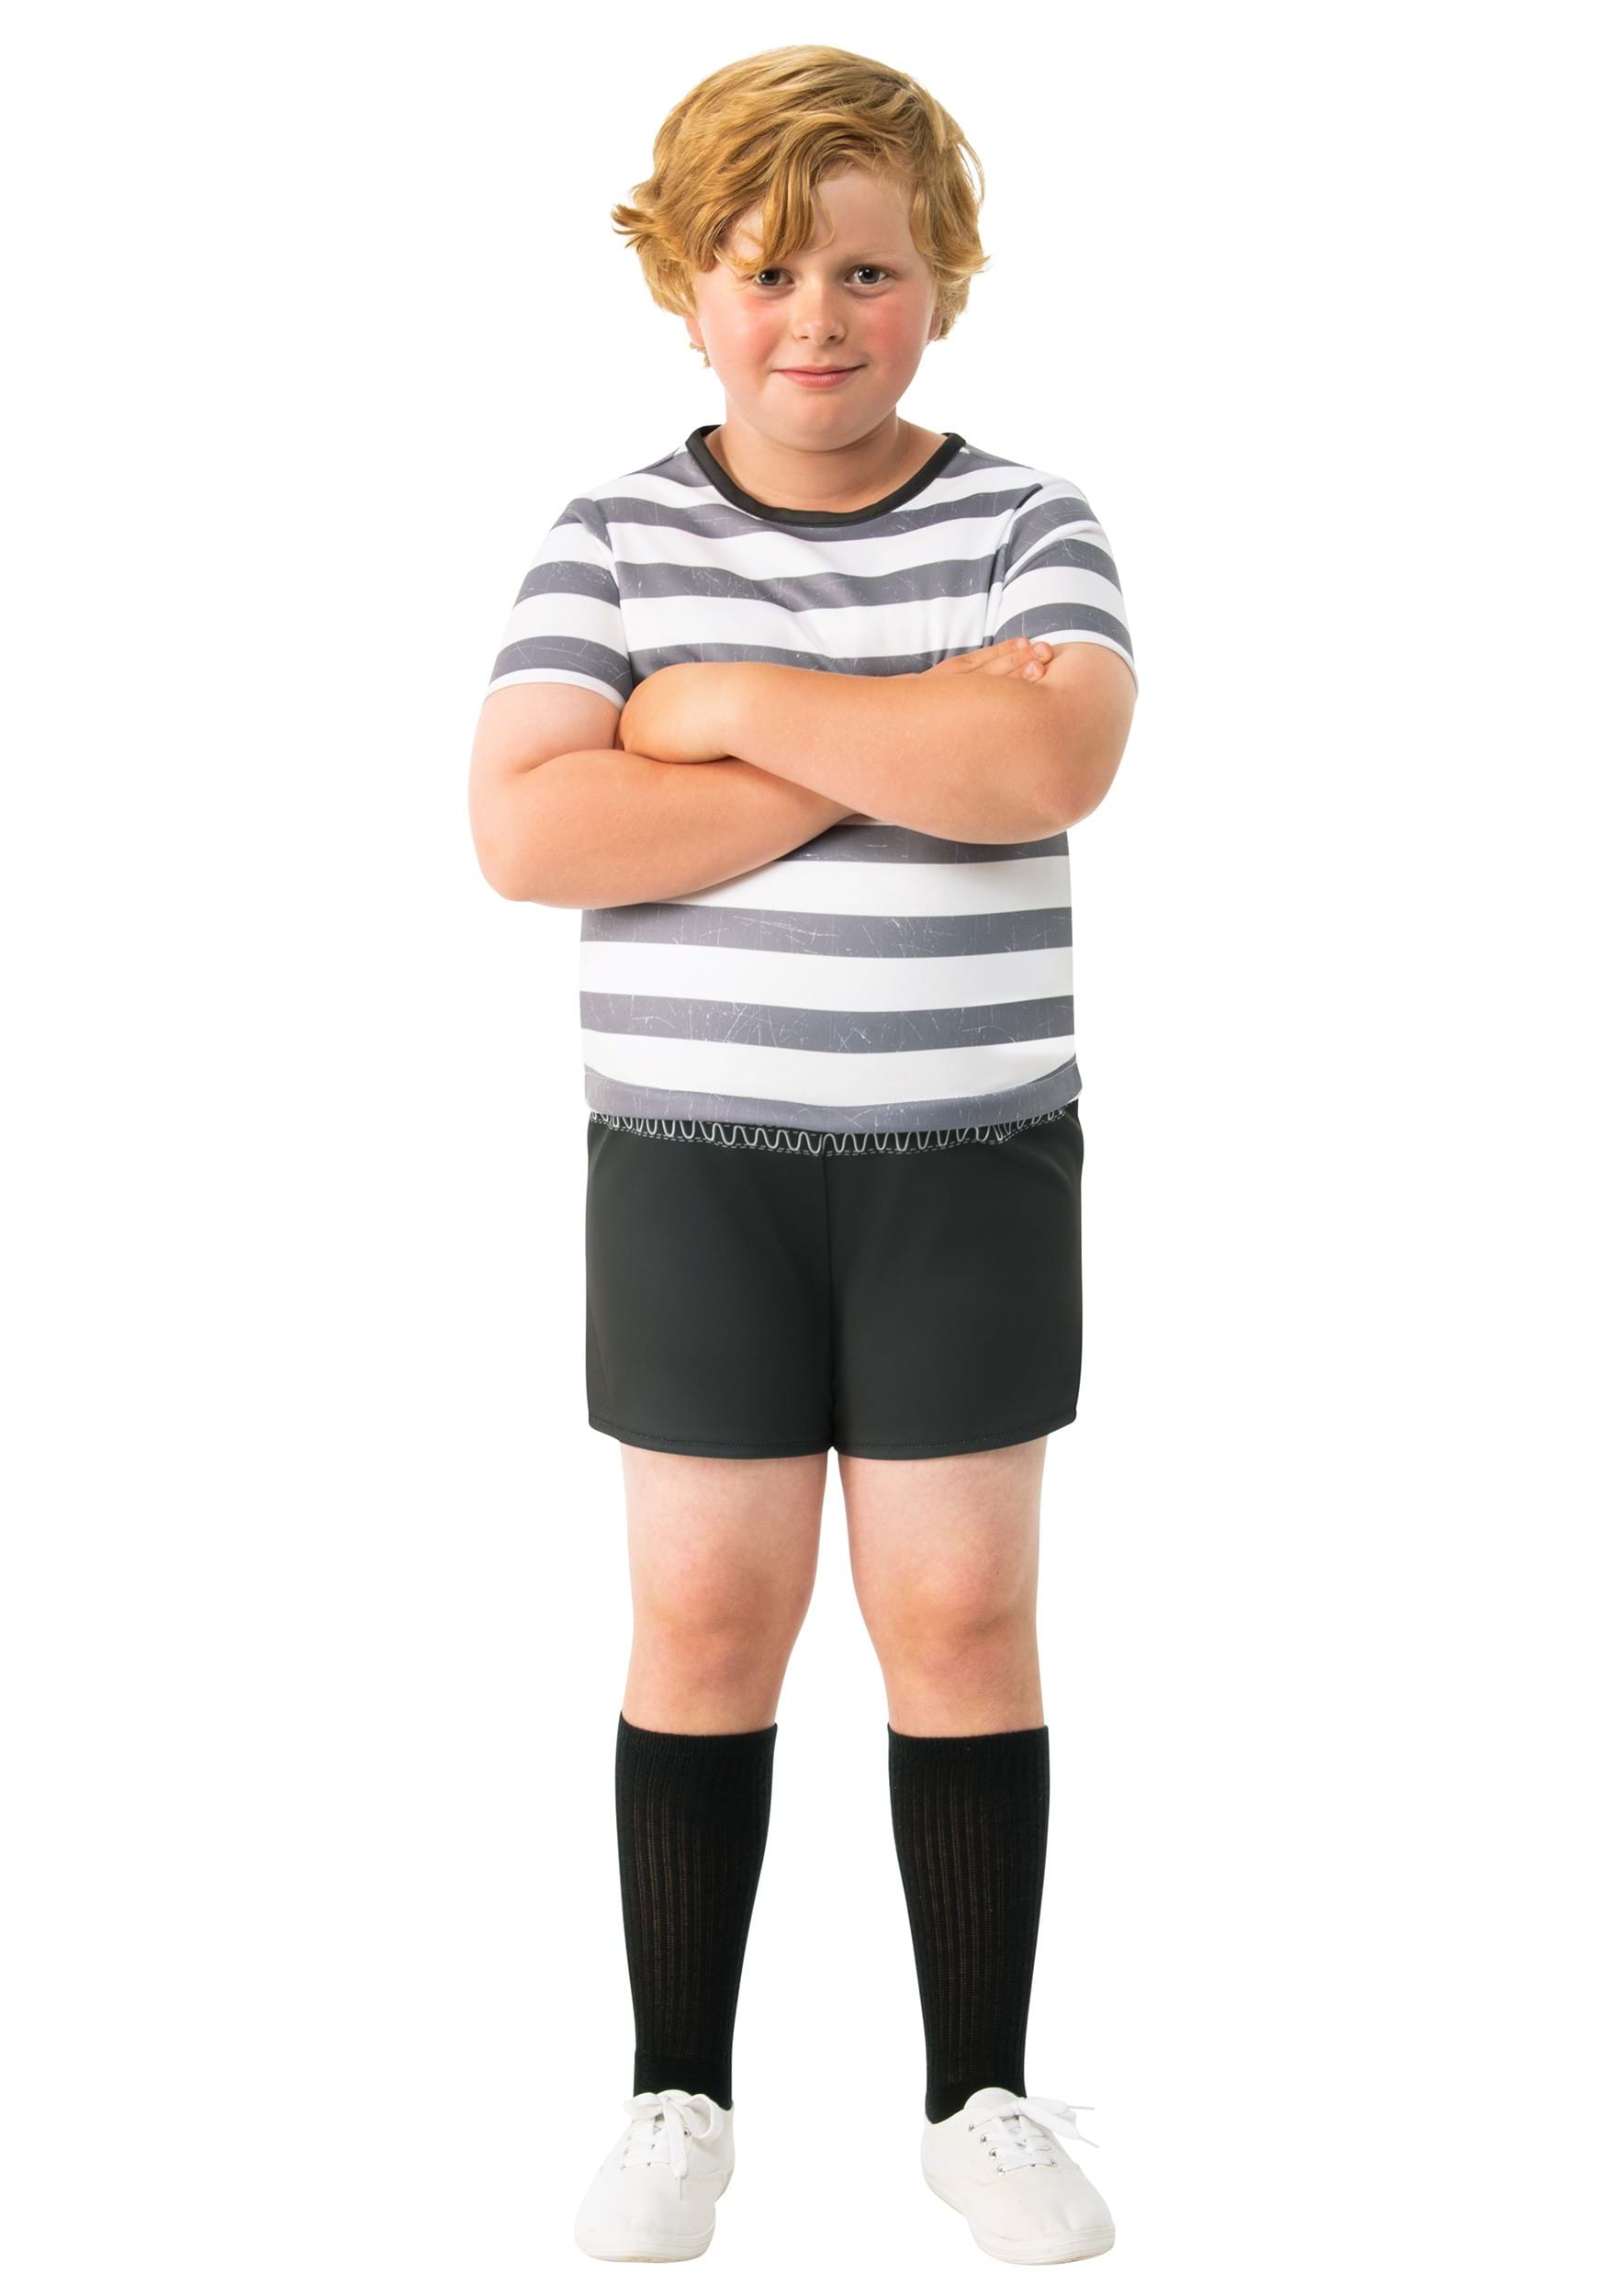 The Addams Family Pugsley Kid's Costume